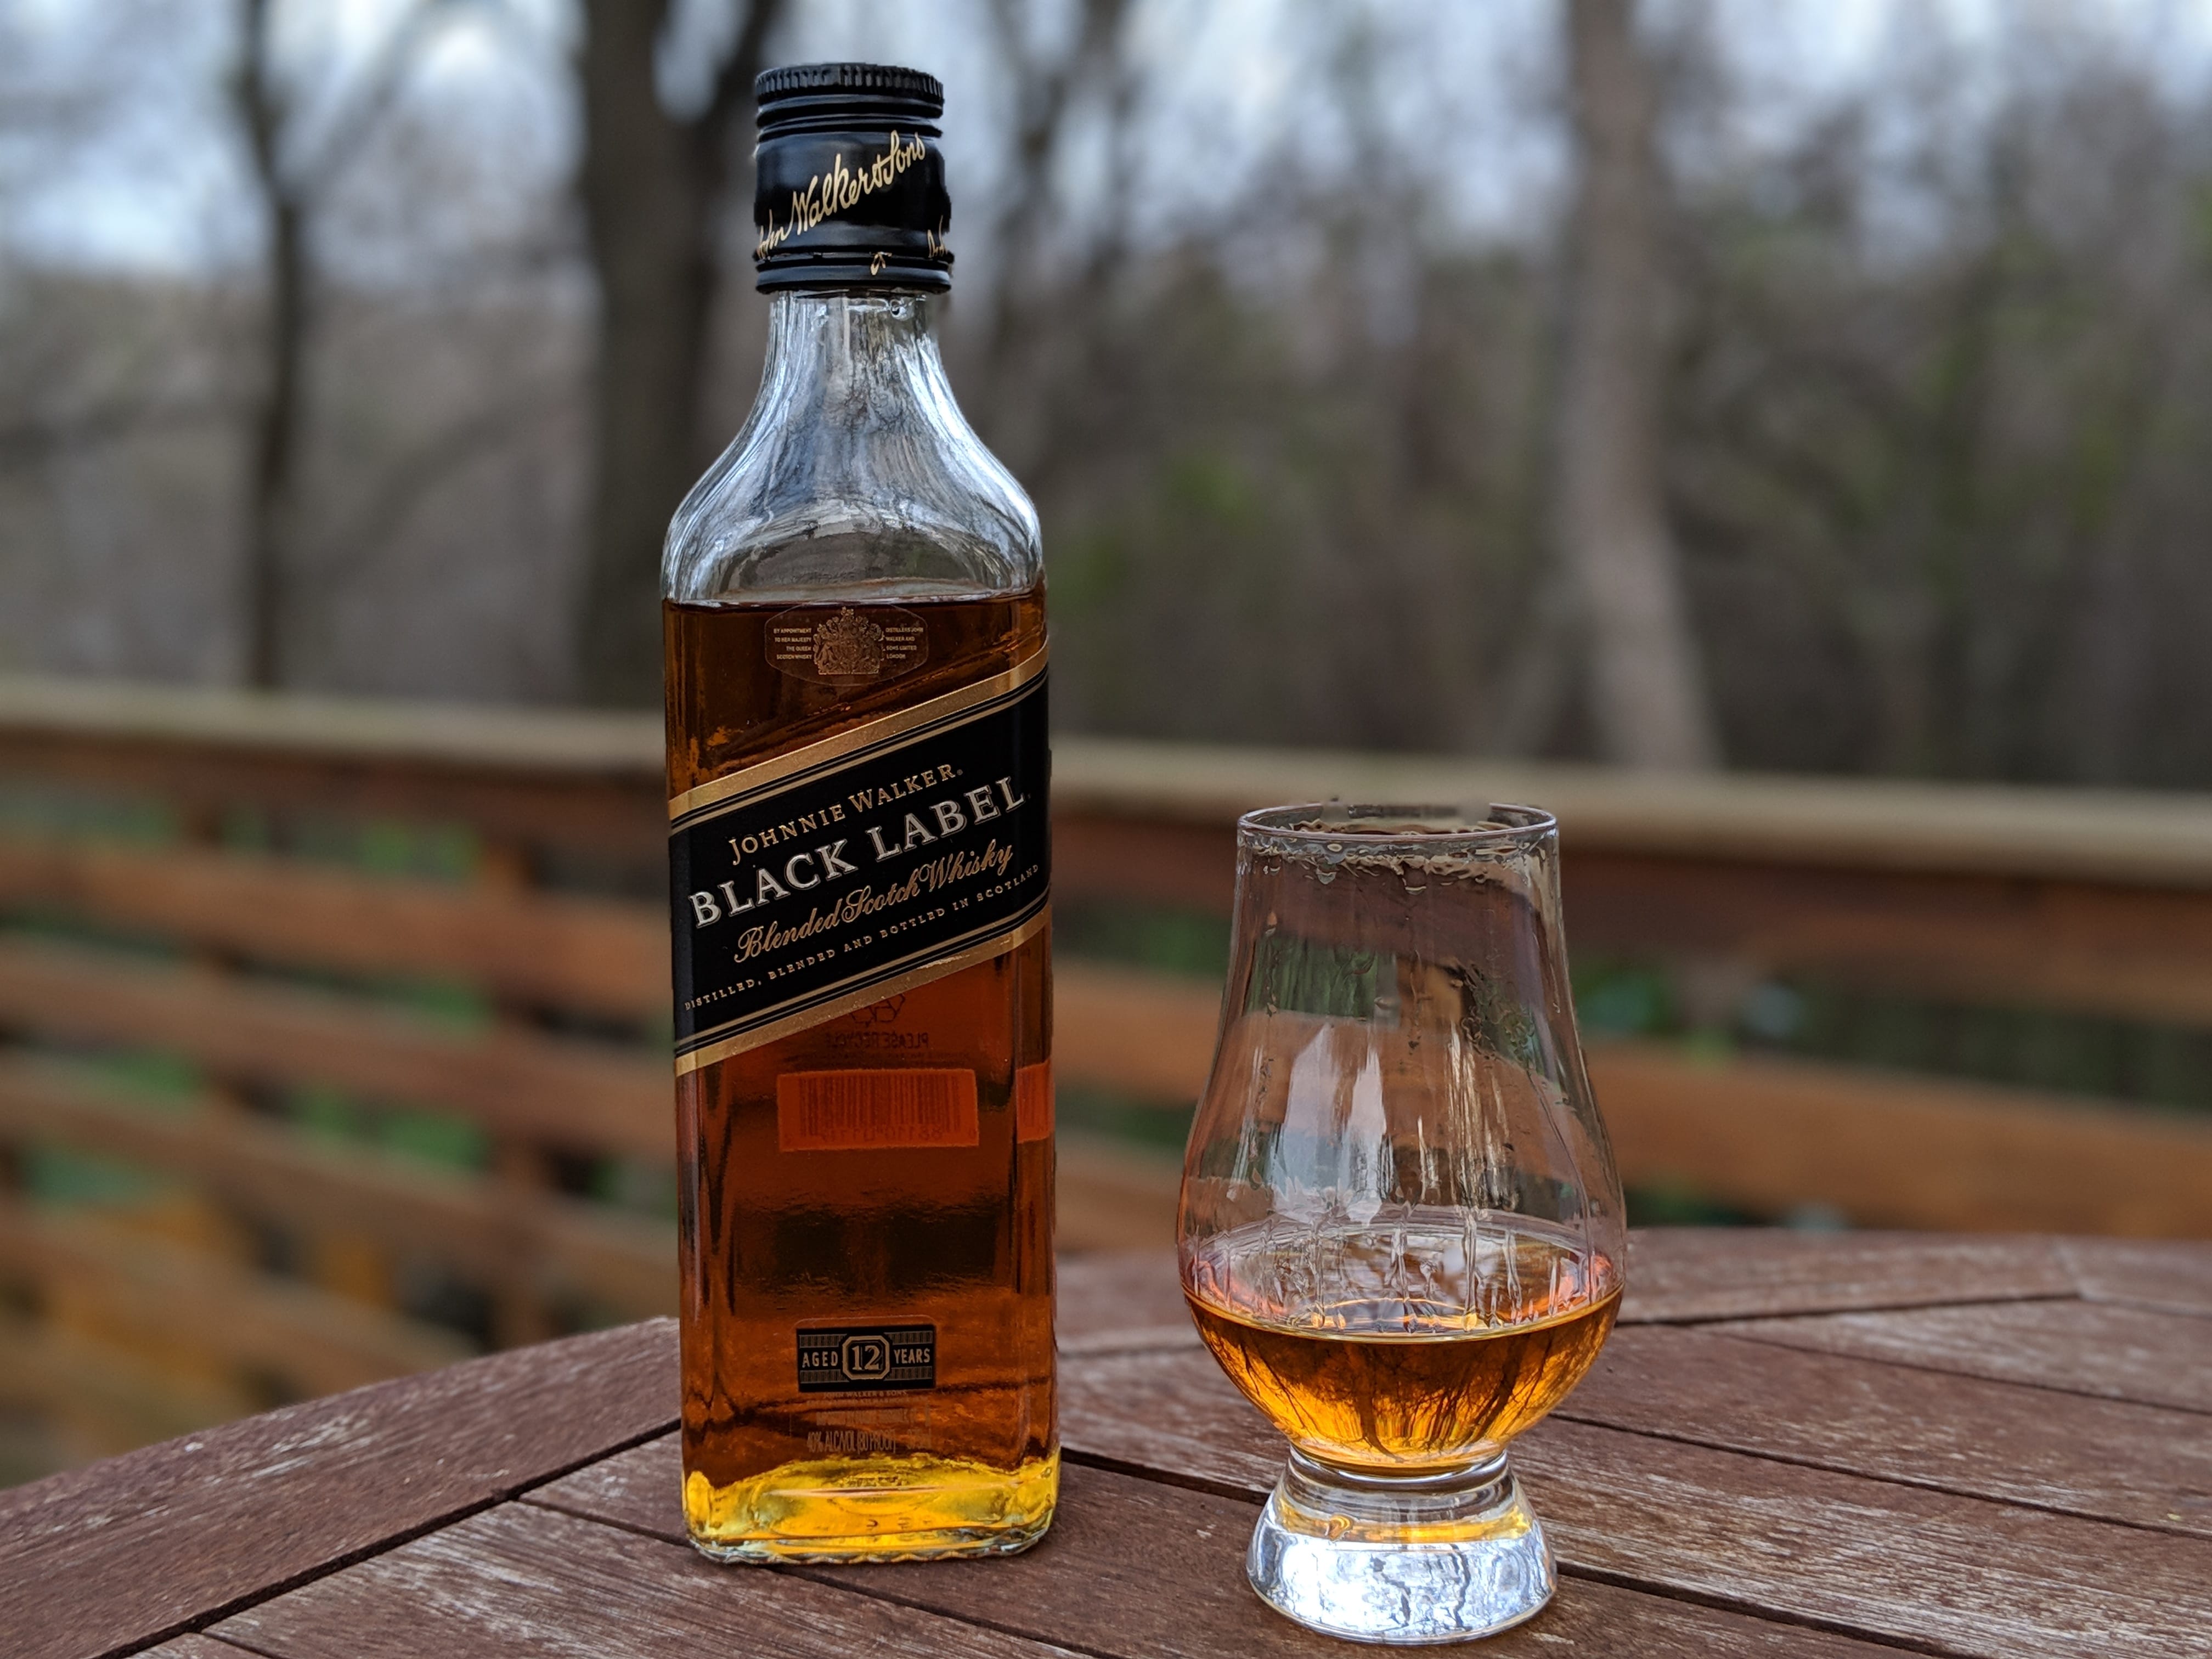 Whiskey Review: Johnnie Walker Black Scotch Whisky